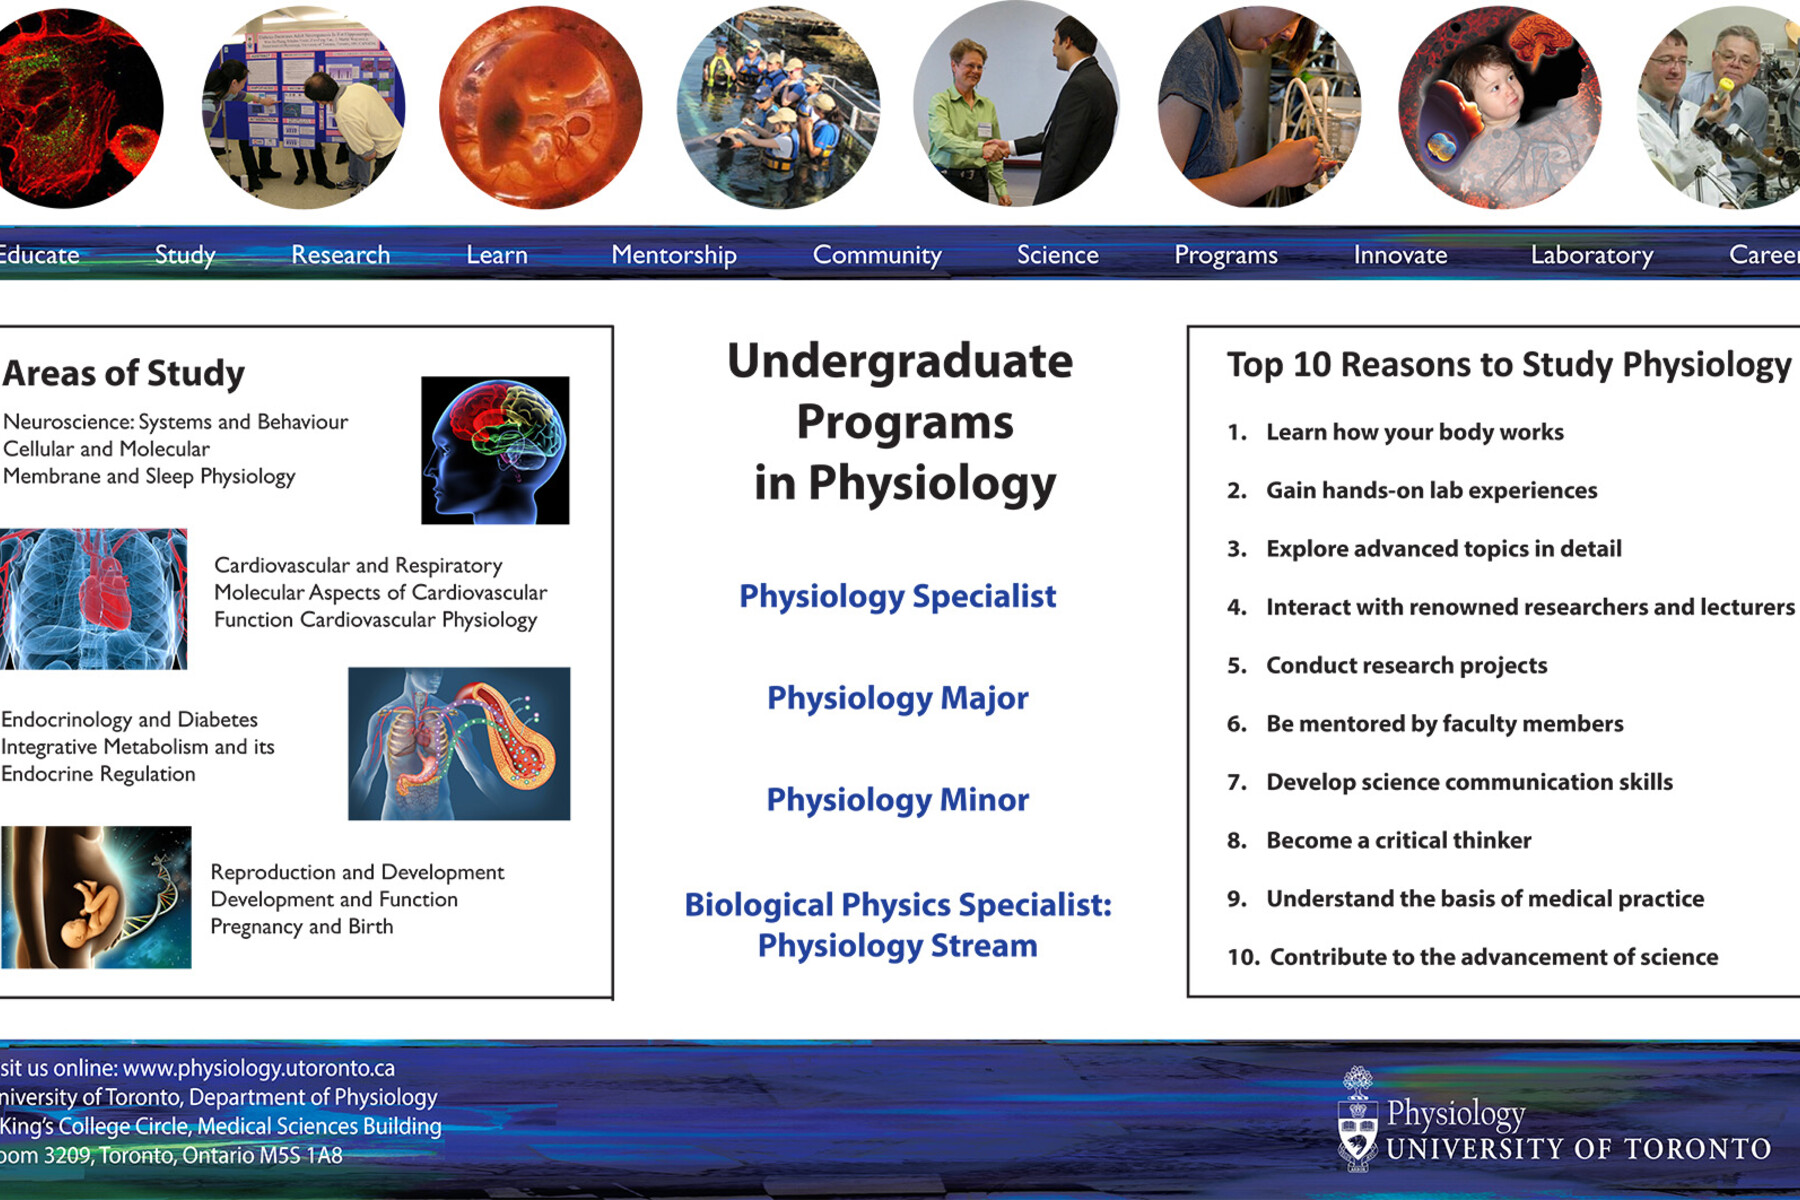 Poster describing different undergraduate programs in Physiology also described in site.